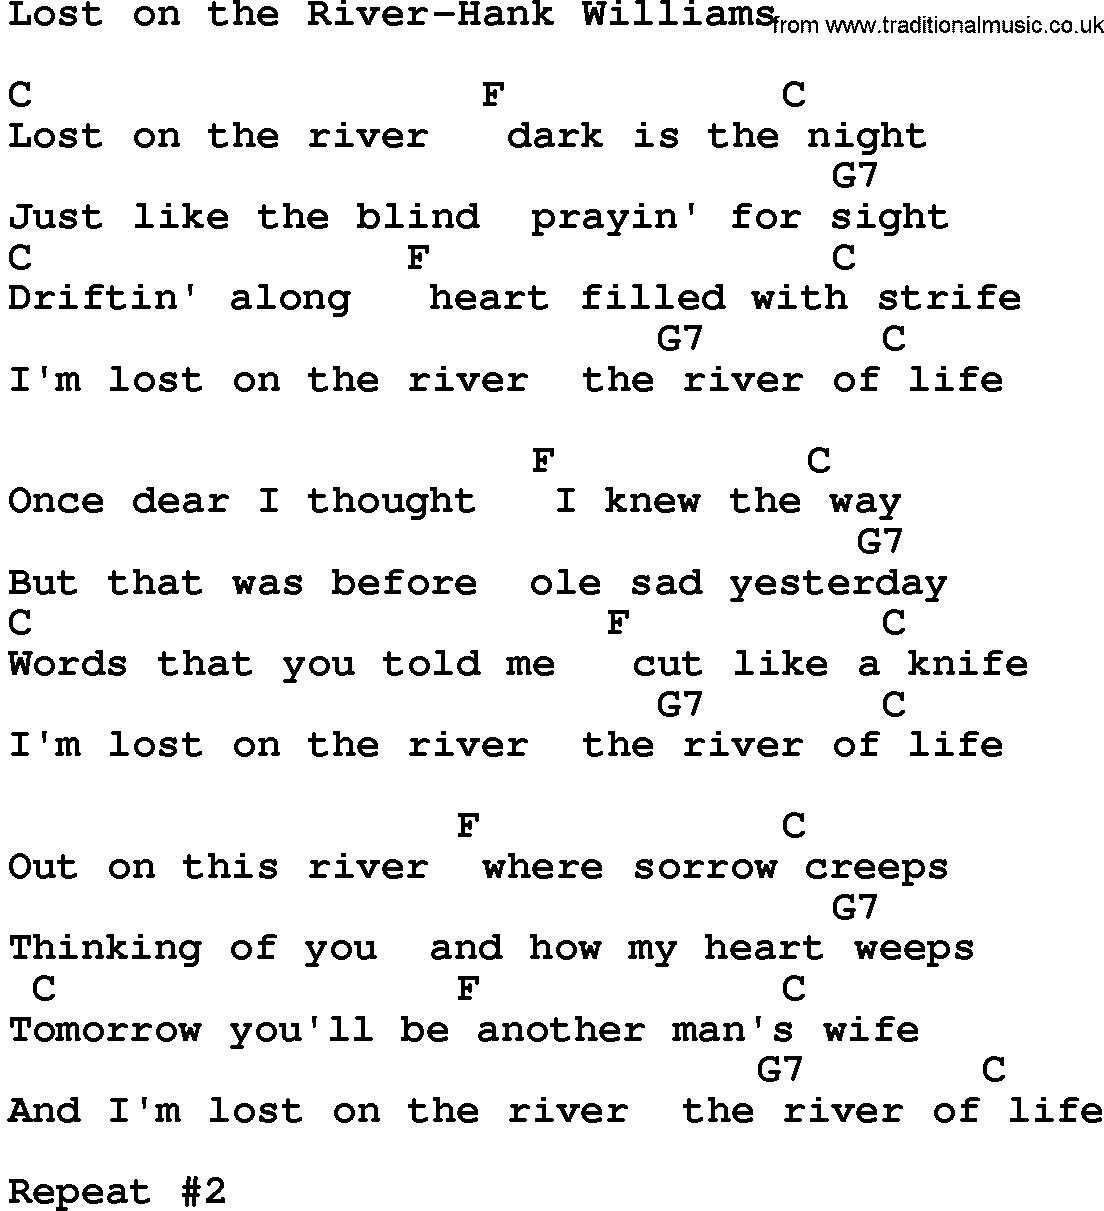 Country music song: Lost On The River-Hank Williams  lyrics and chords